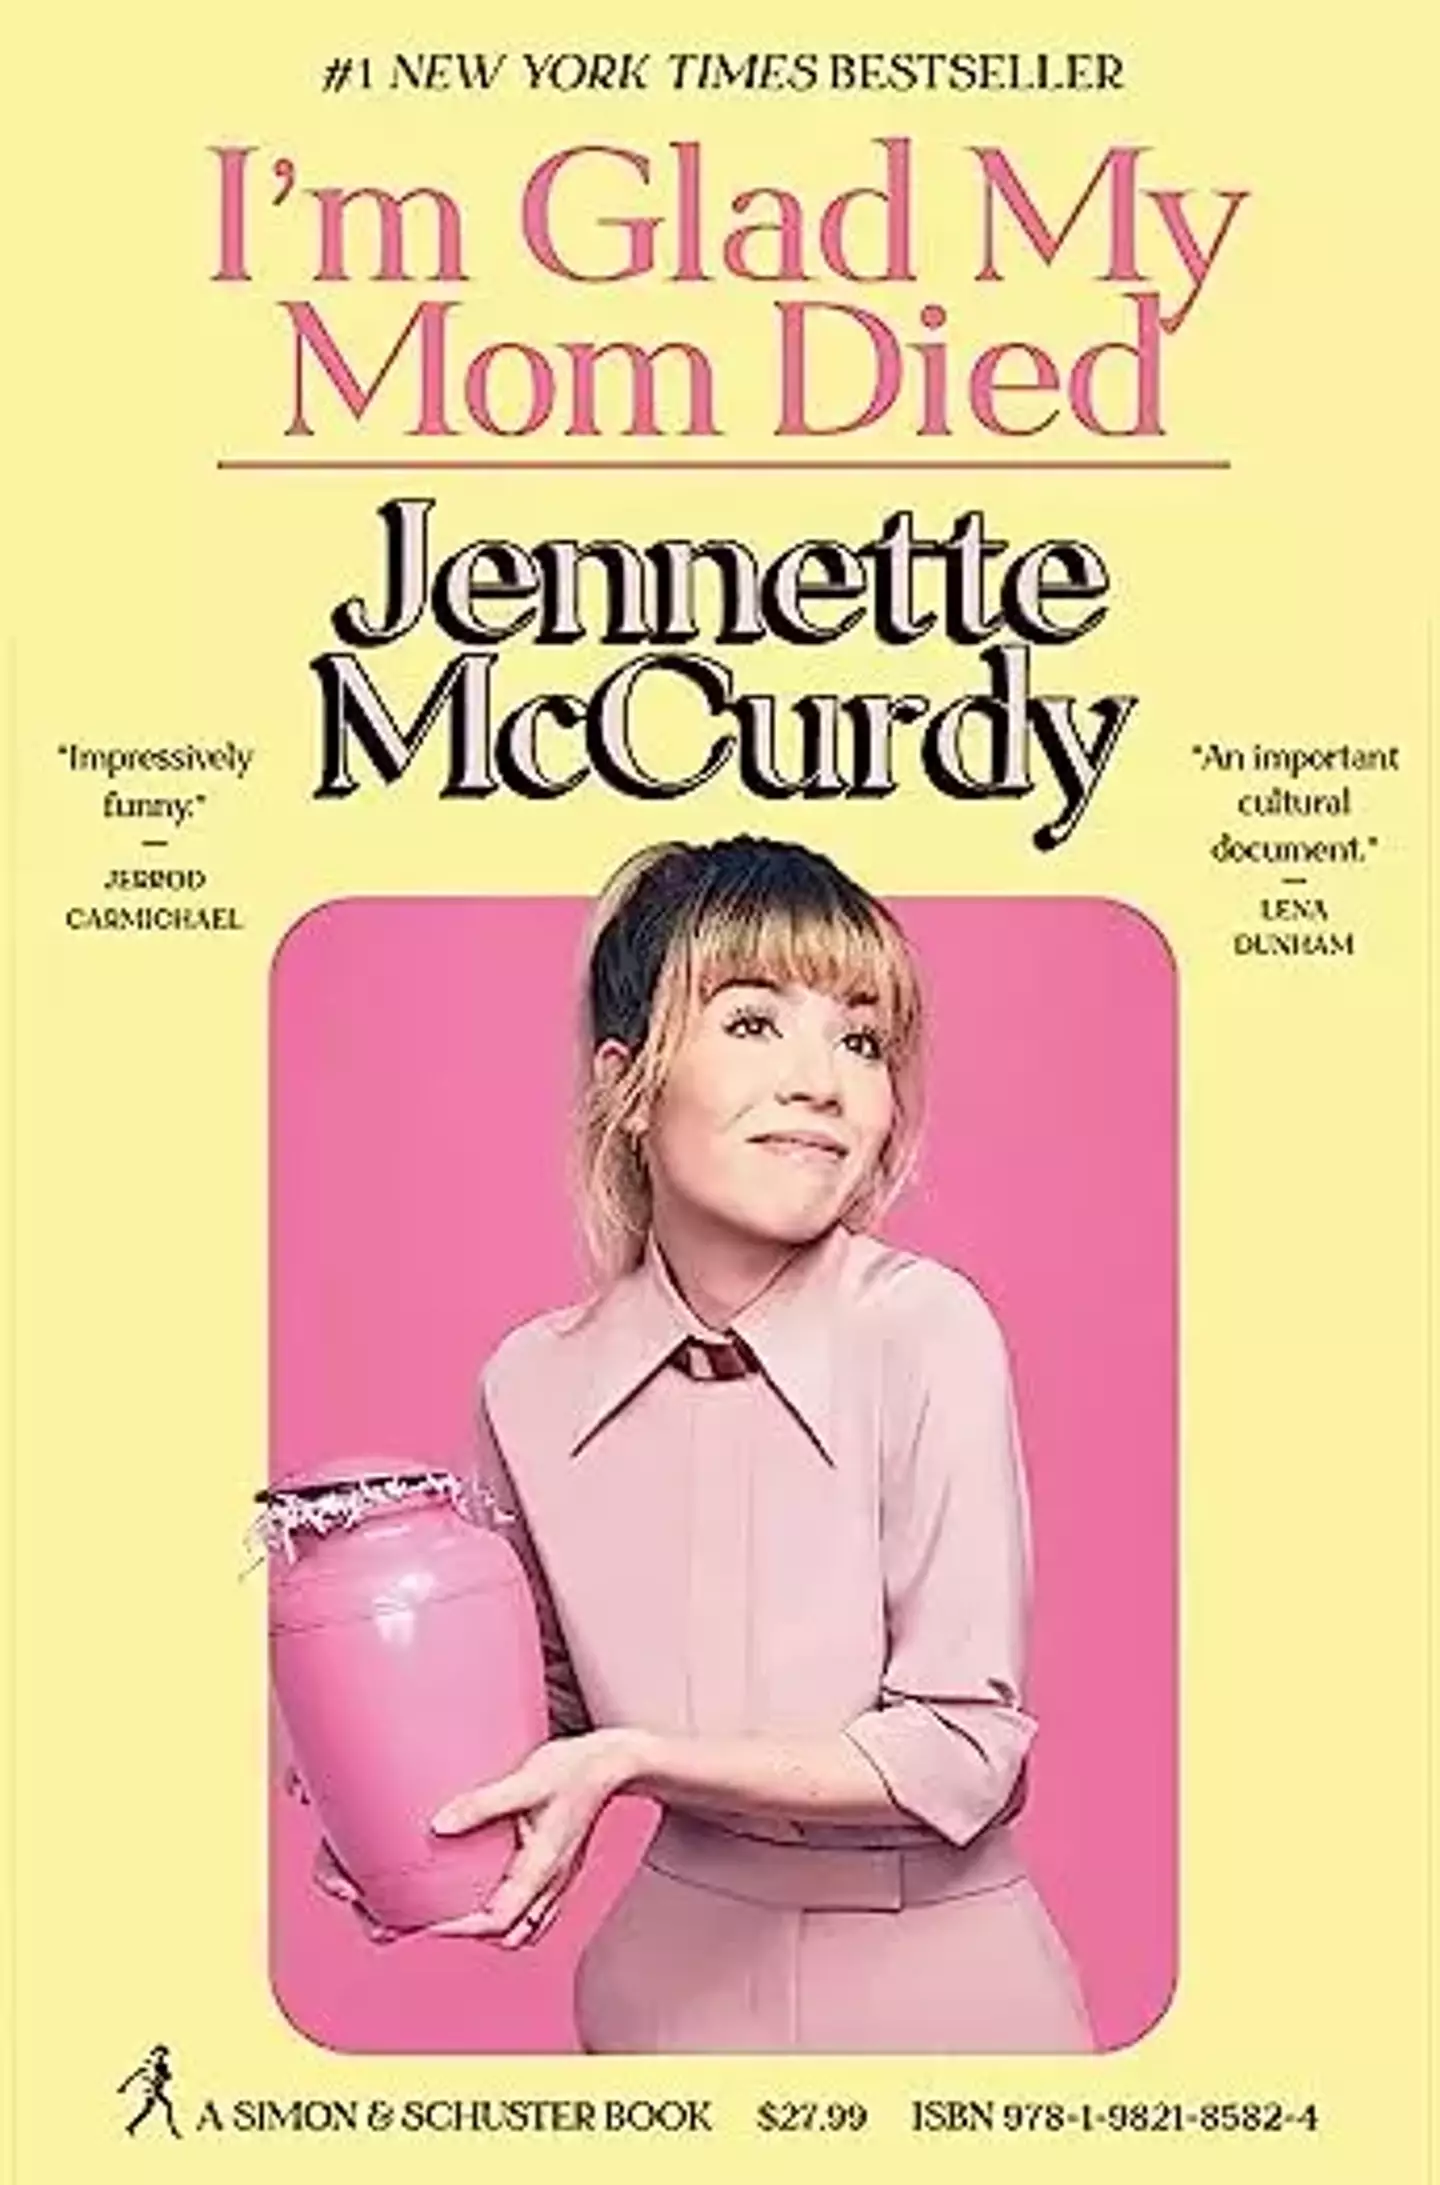 McCurdy mentioned 'The Creator' in her memoir.